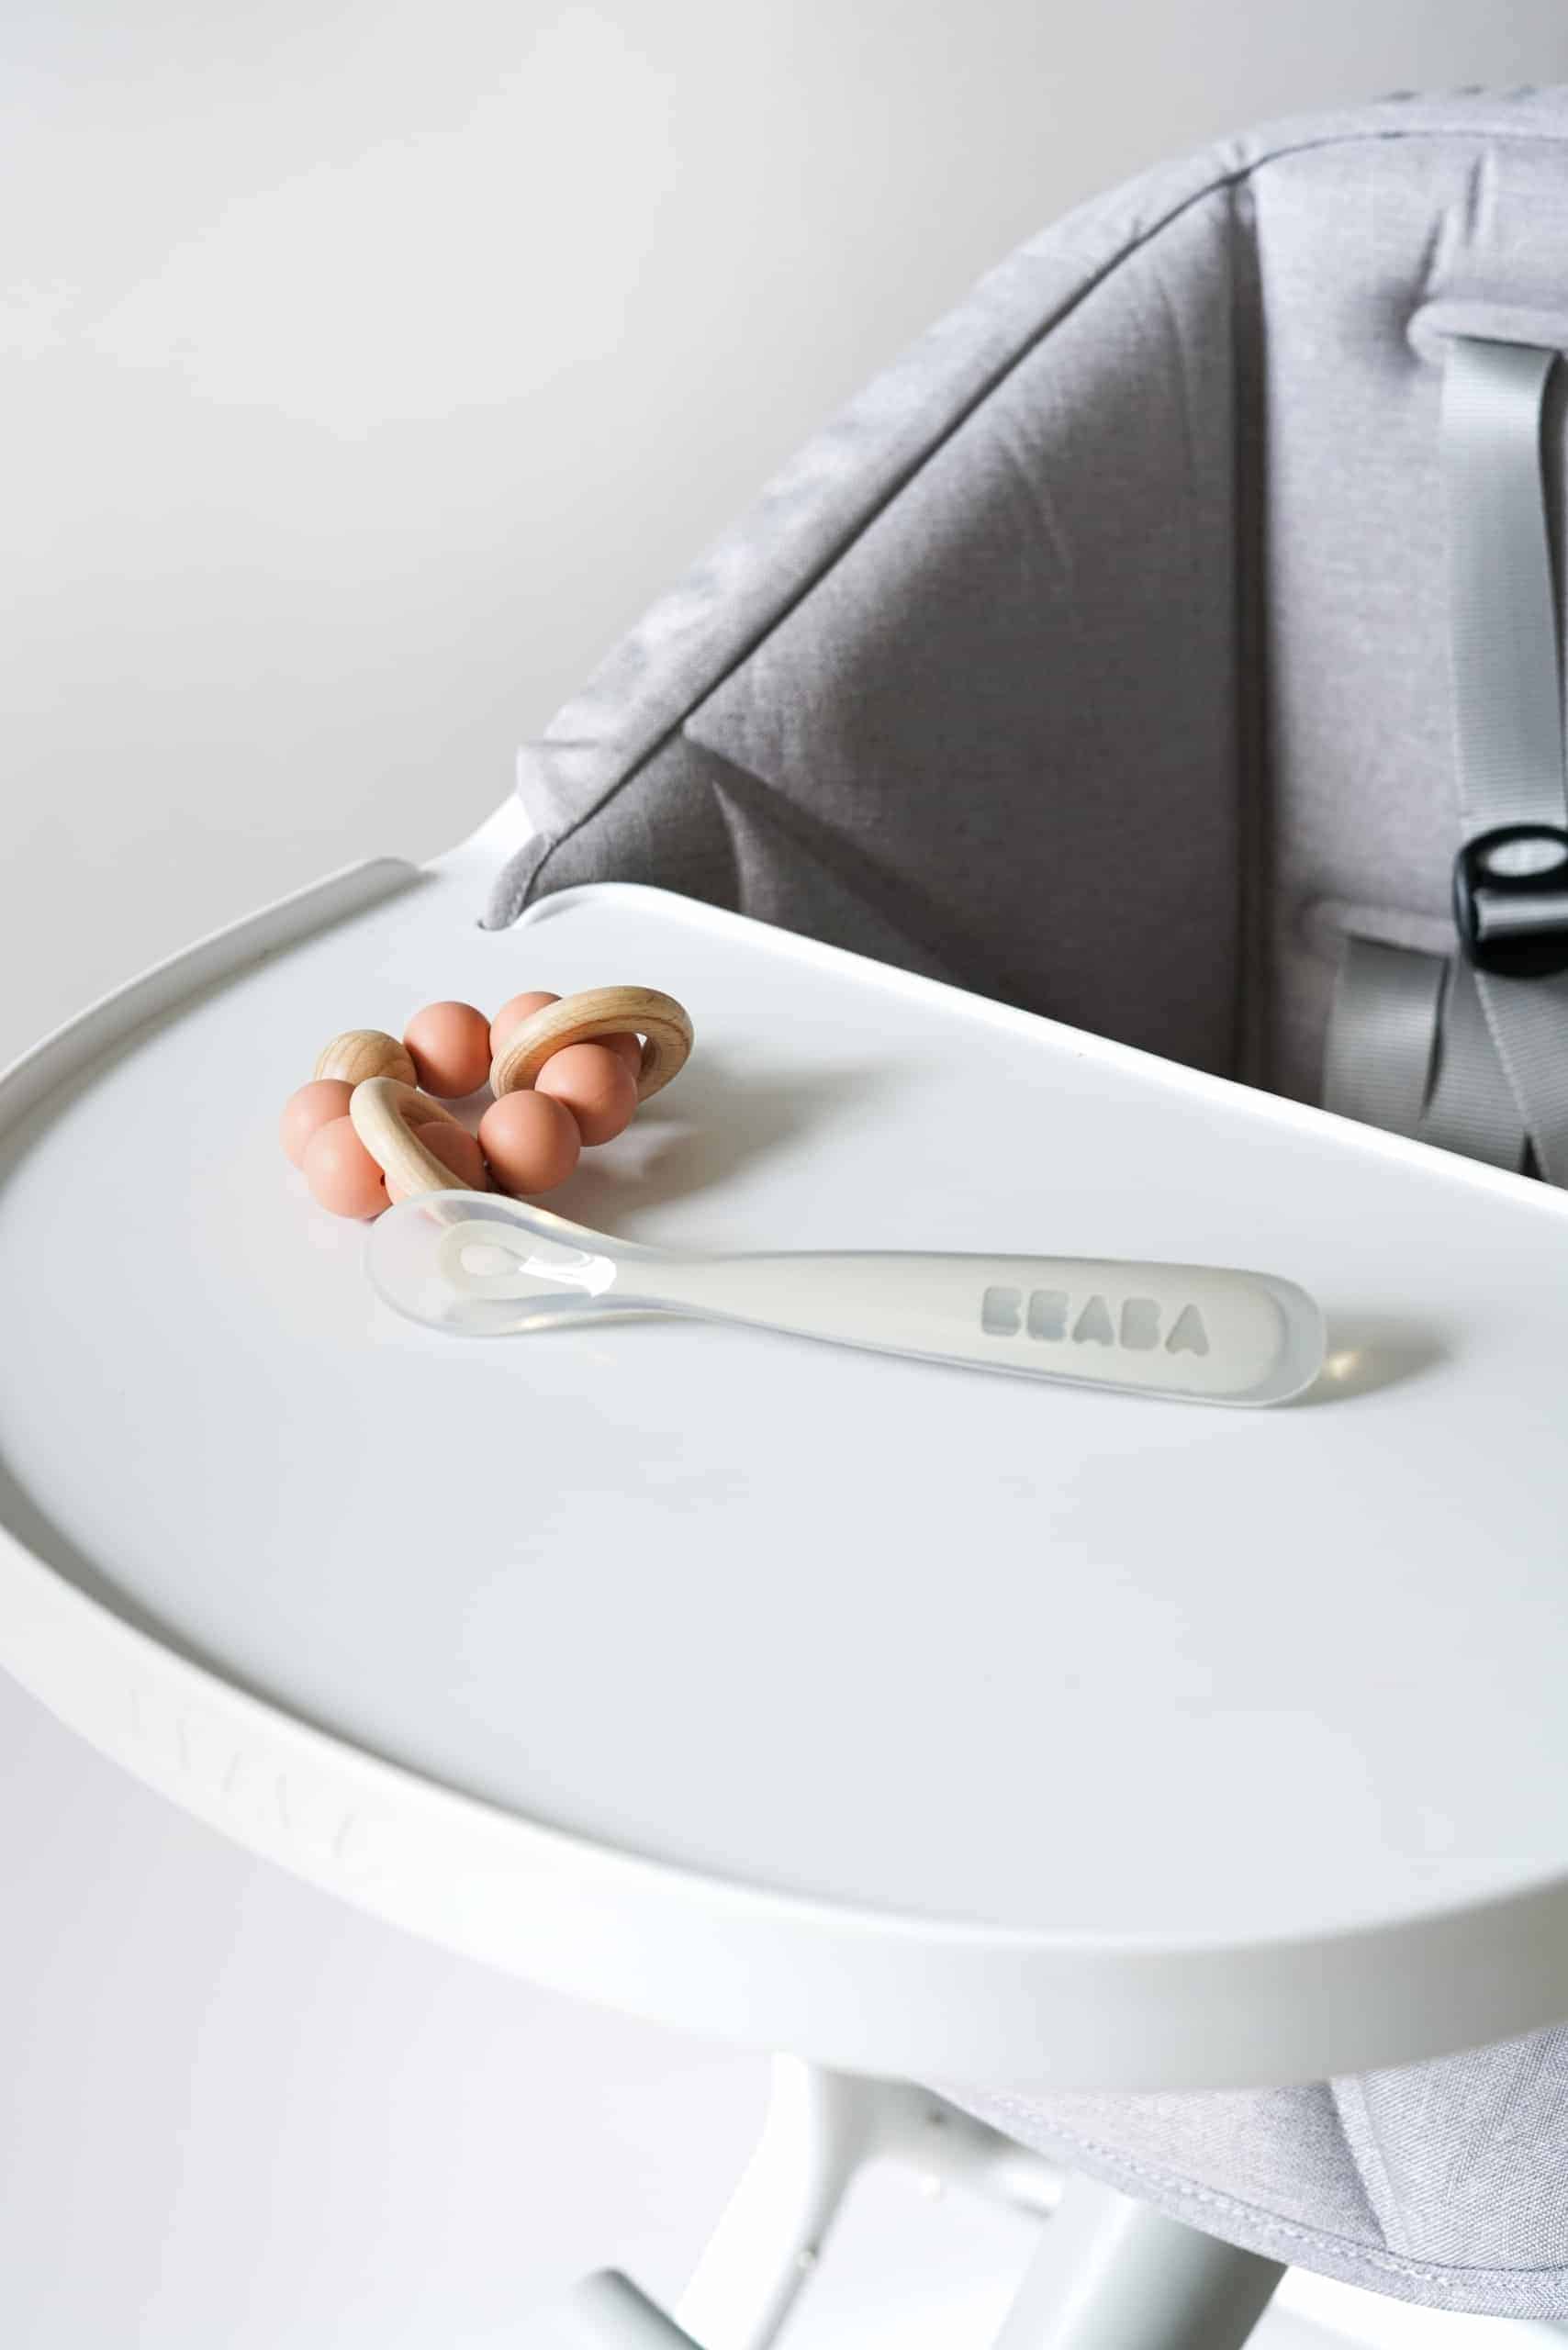 Beaba first foods spoon on high chair tray next to rattle